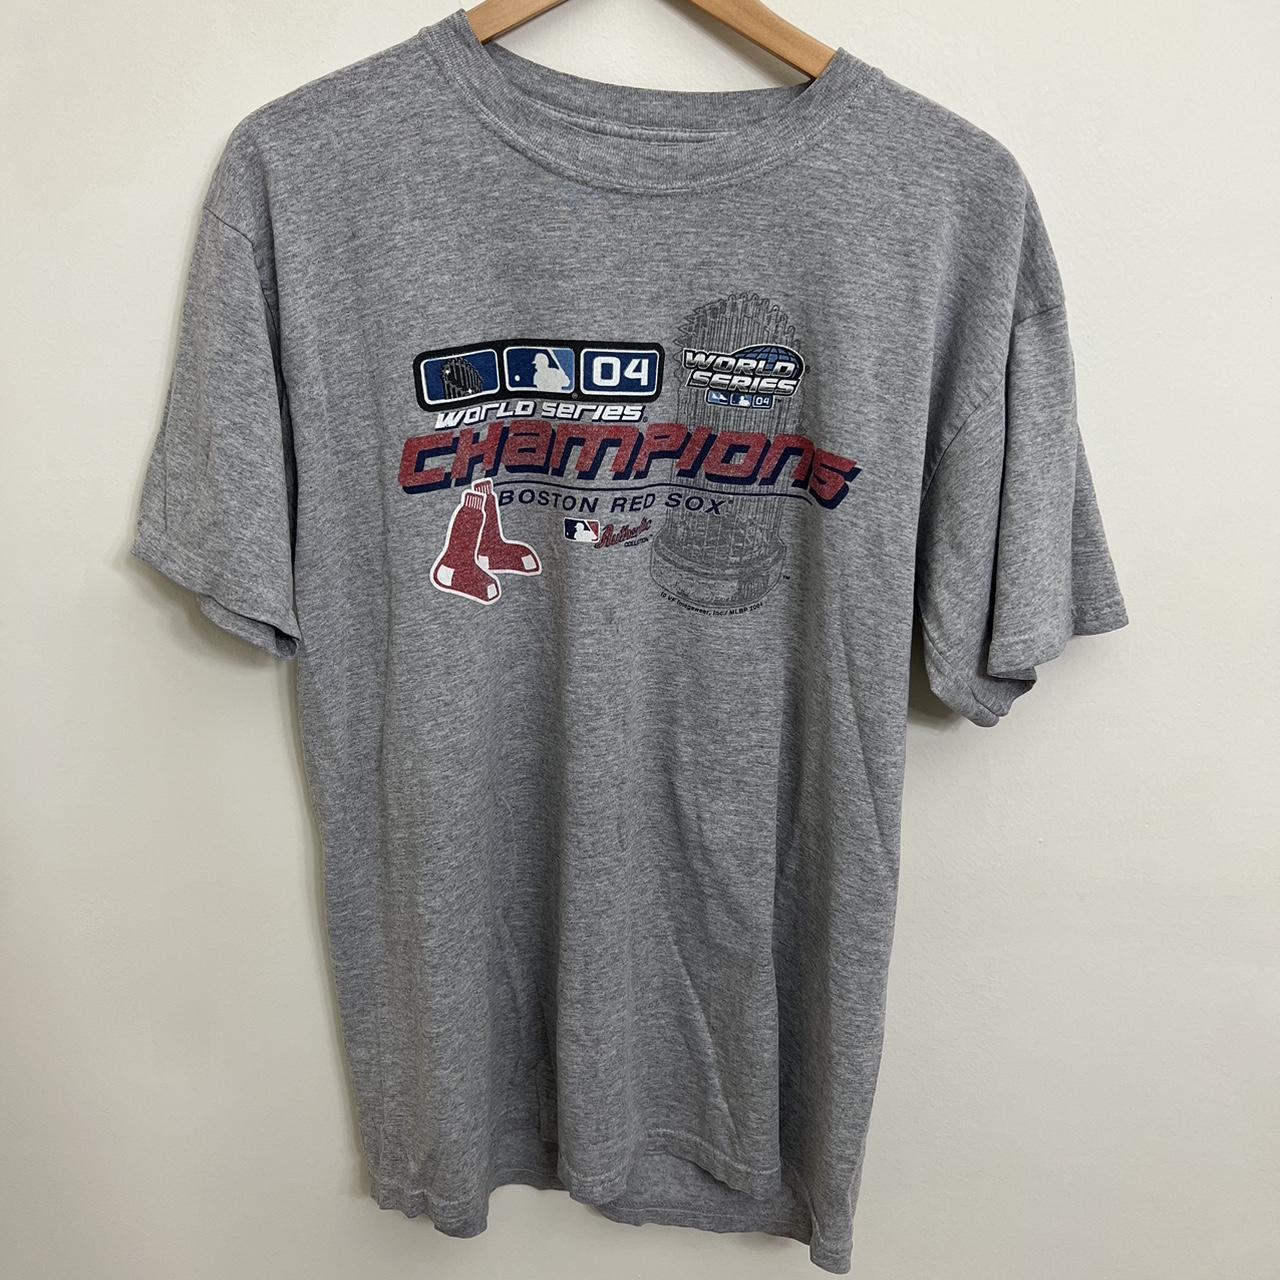 2004 Red Sox oversized graphic tee shirt , #redsox